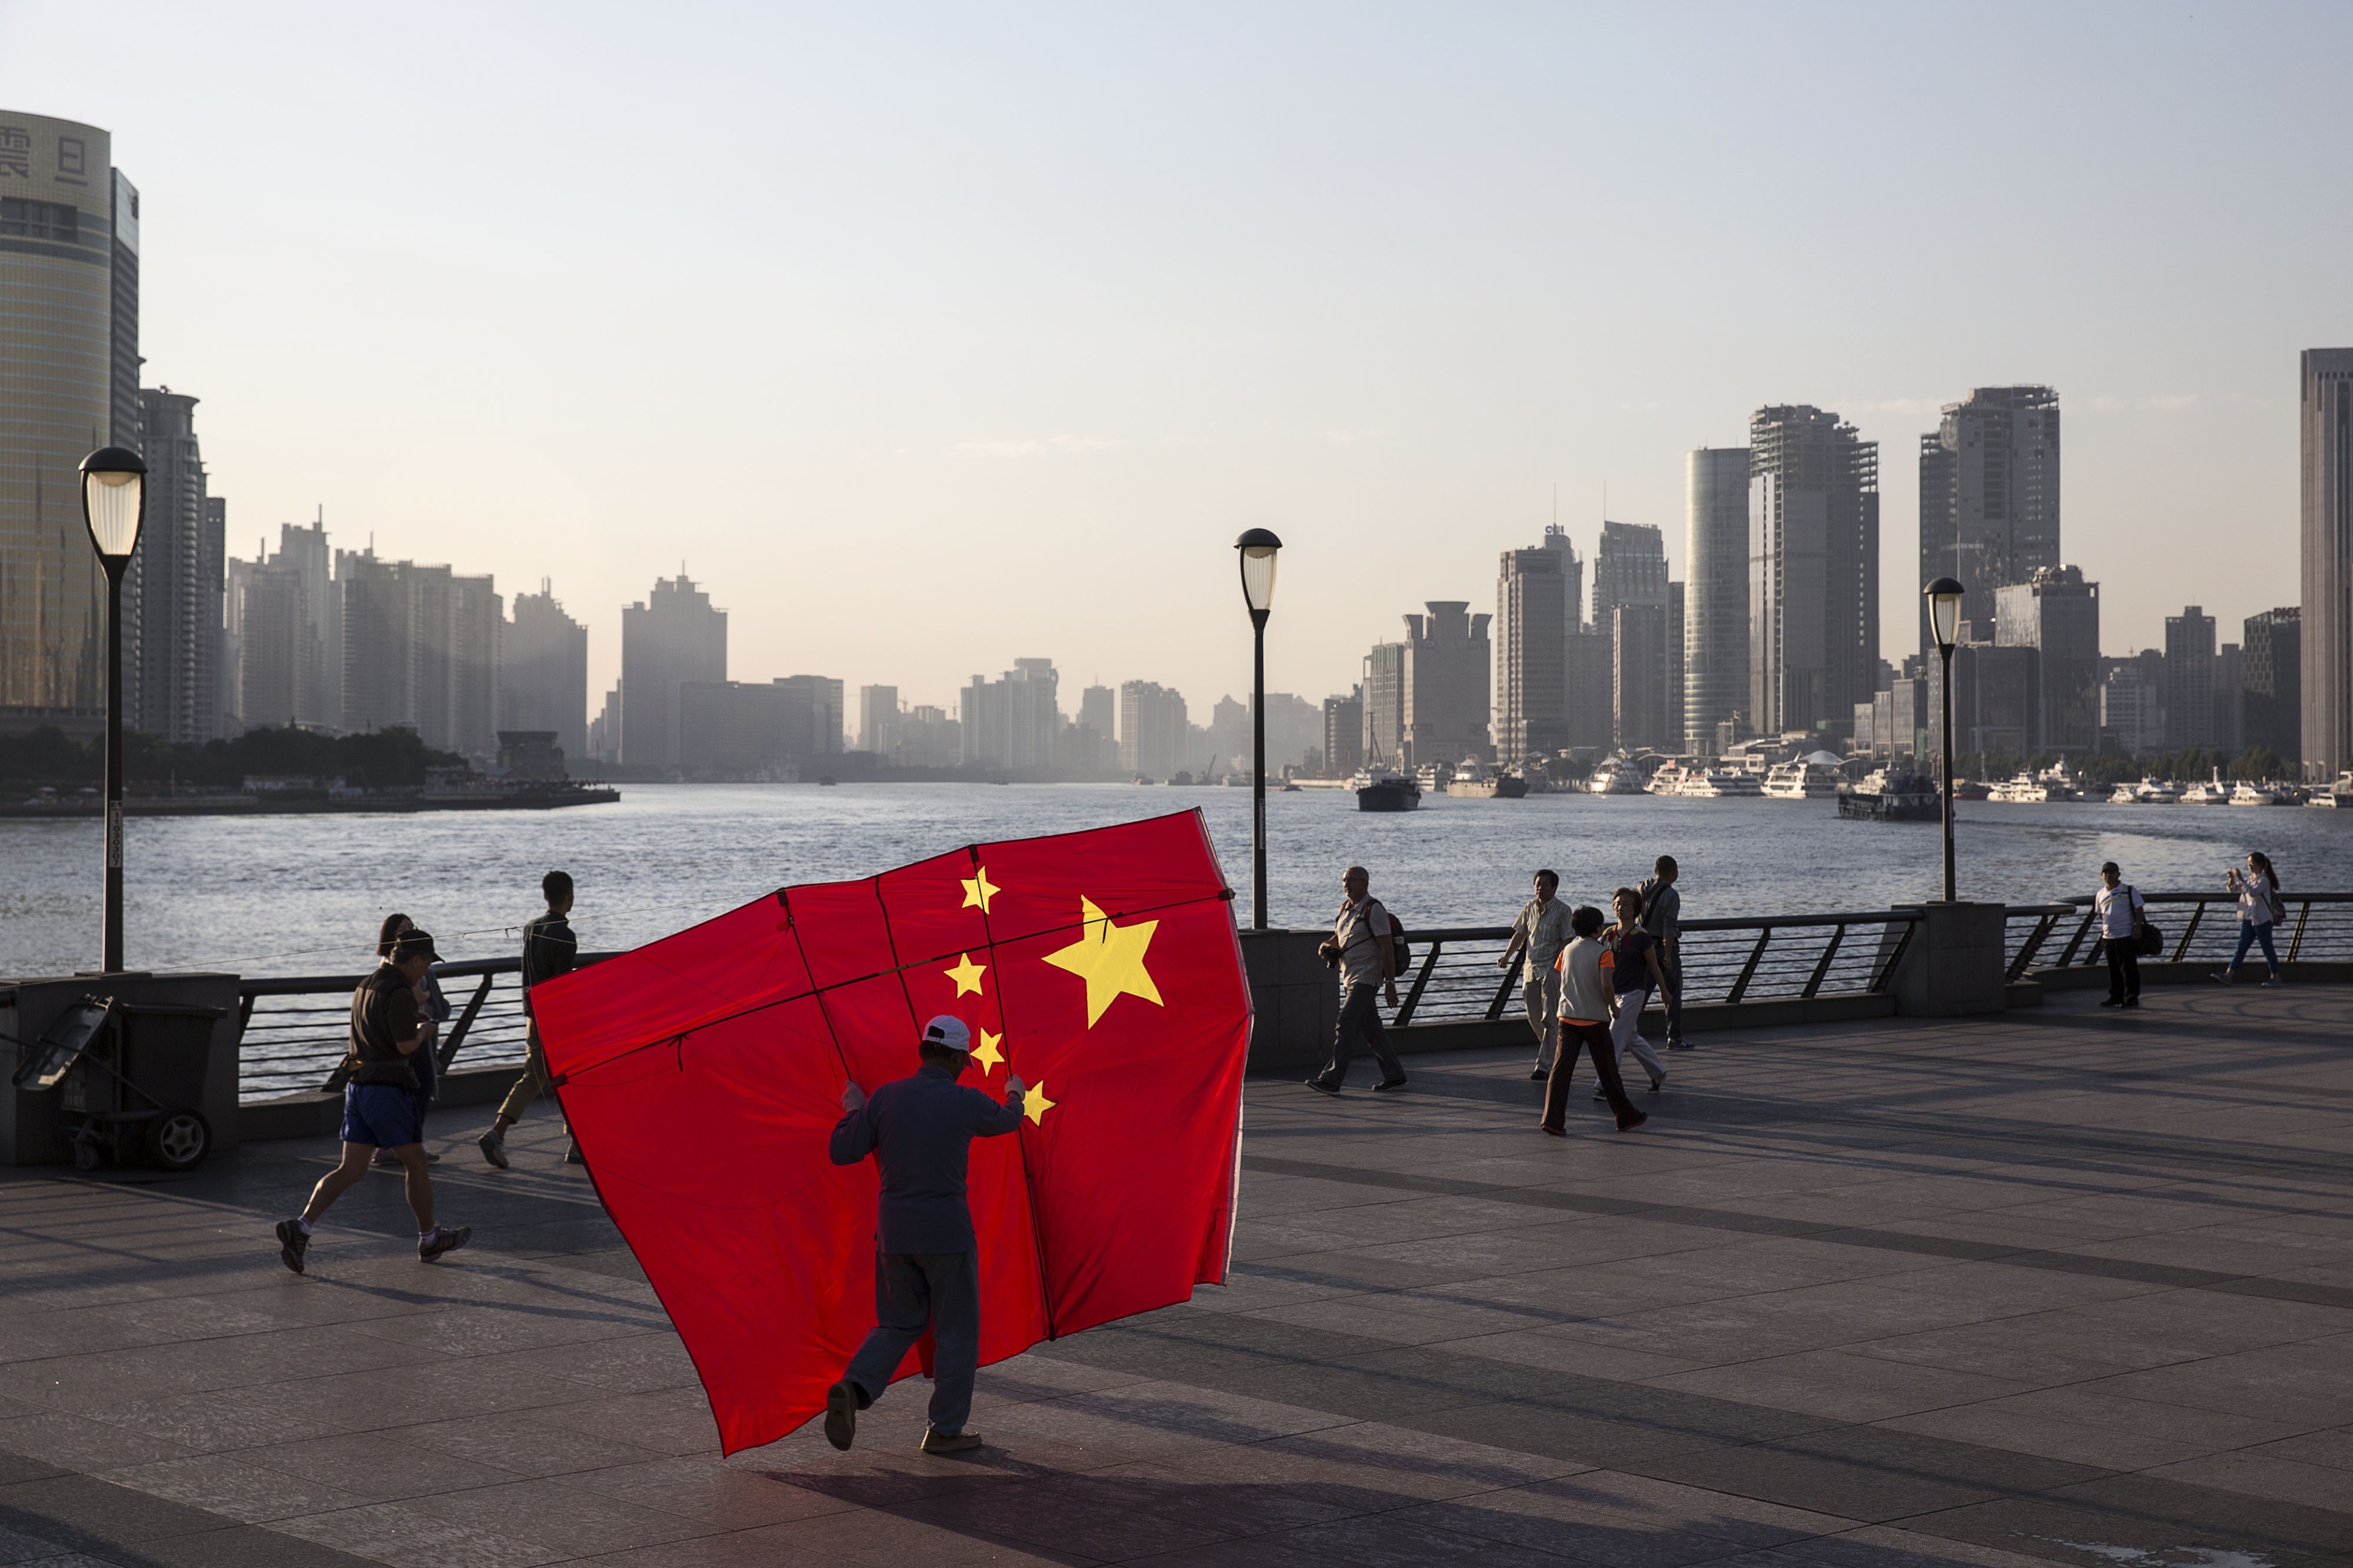 General Views Of Shanghai As China's Lingering Deflation Risks Offer Room For More Easing